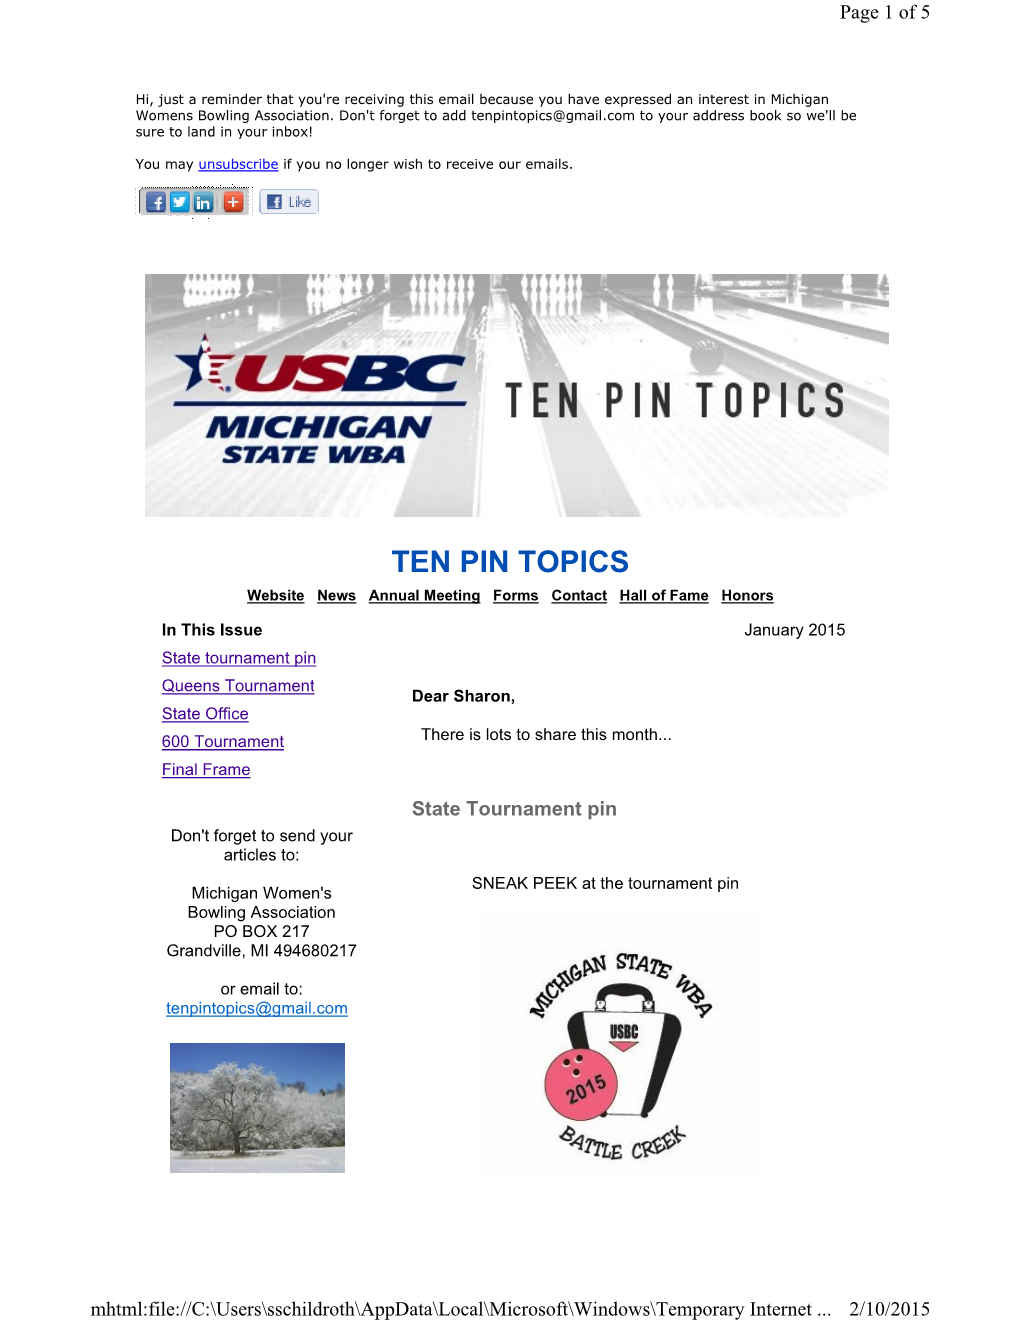 TEN PIN TOPICS Website News Annual Meeting Forms Contact Hall of Fame Honors